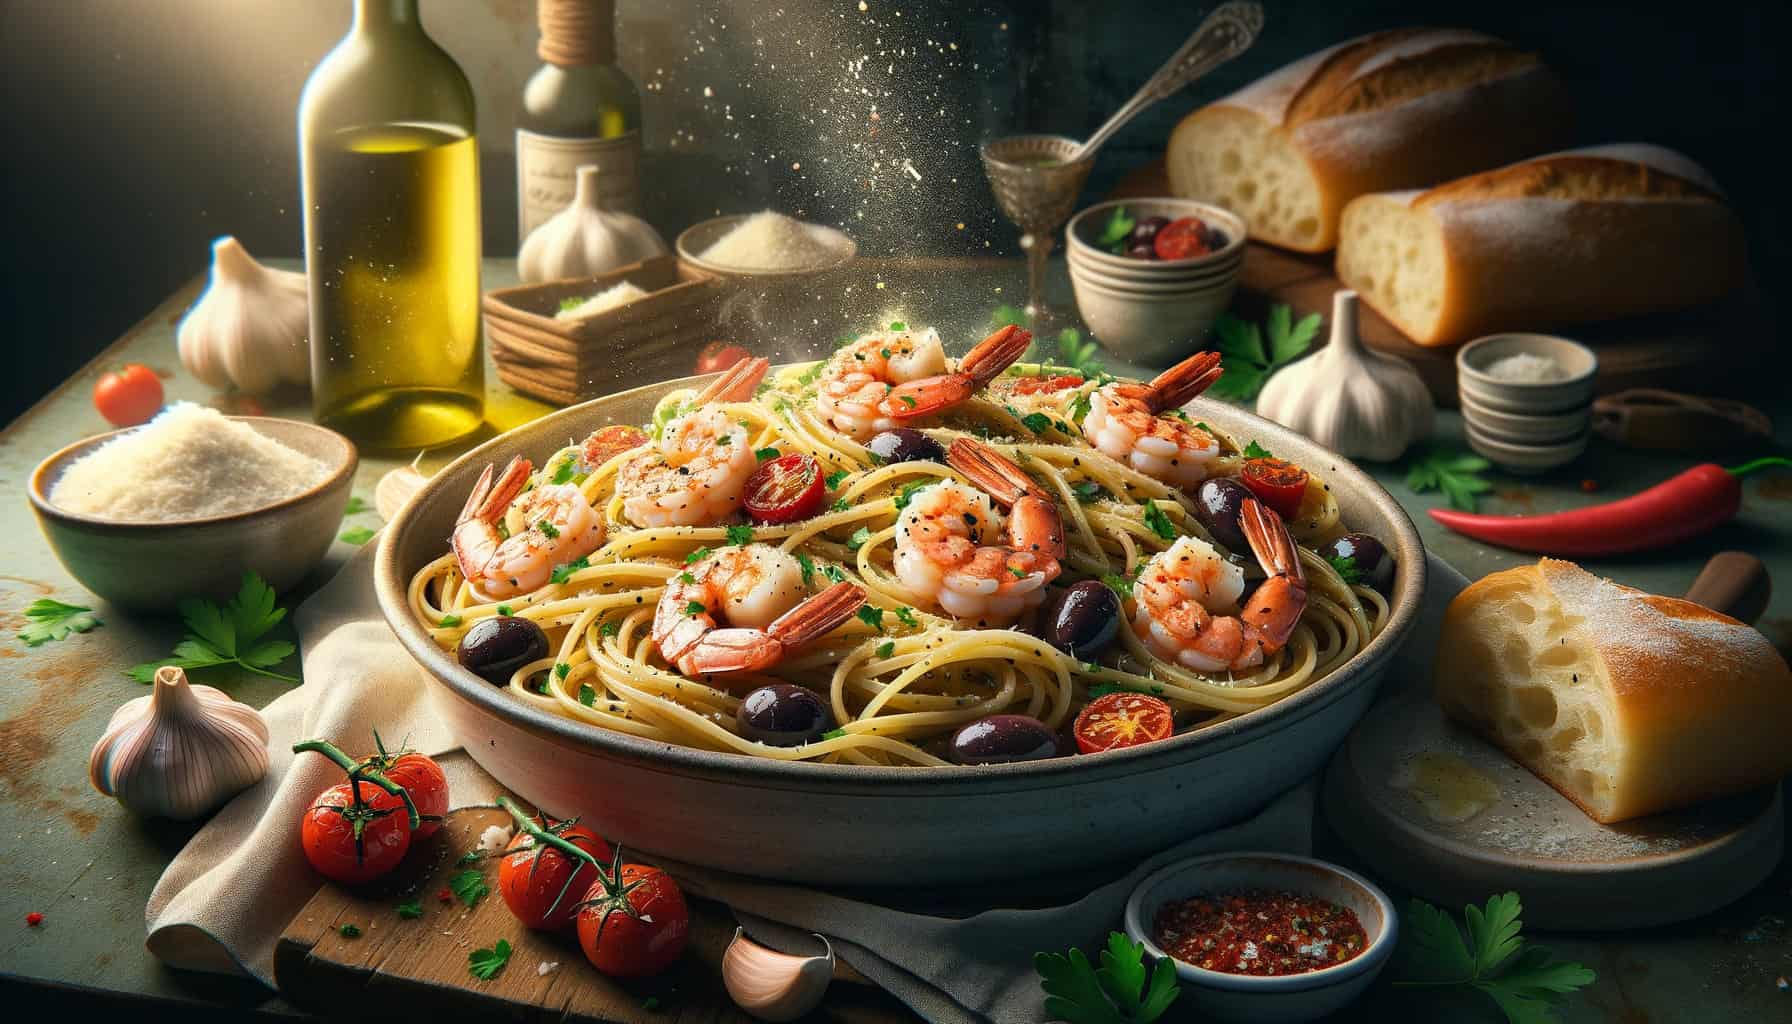 Photo-realistic depiction of mediterranean garlic shrimp pasta. A deep dish holds twirls of spaghetti generously coated in a garlic-infused olive oil sauce. Interspersed within the pasta are succulent, pink shrimp seared to perfection, plump cherry tomatoes, and kalamata olives. The dish is garnished with freshly chopped parsley, grated parmesan cheese, and red chili flakes. Set against a rustic mediterranean kitchen backdrop with a bottle of white wine and a loaf of crusty bread.